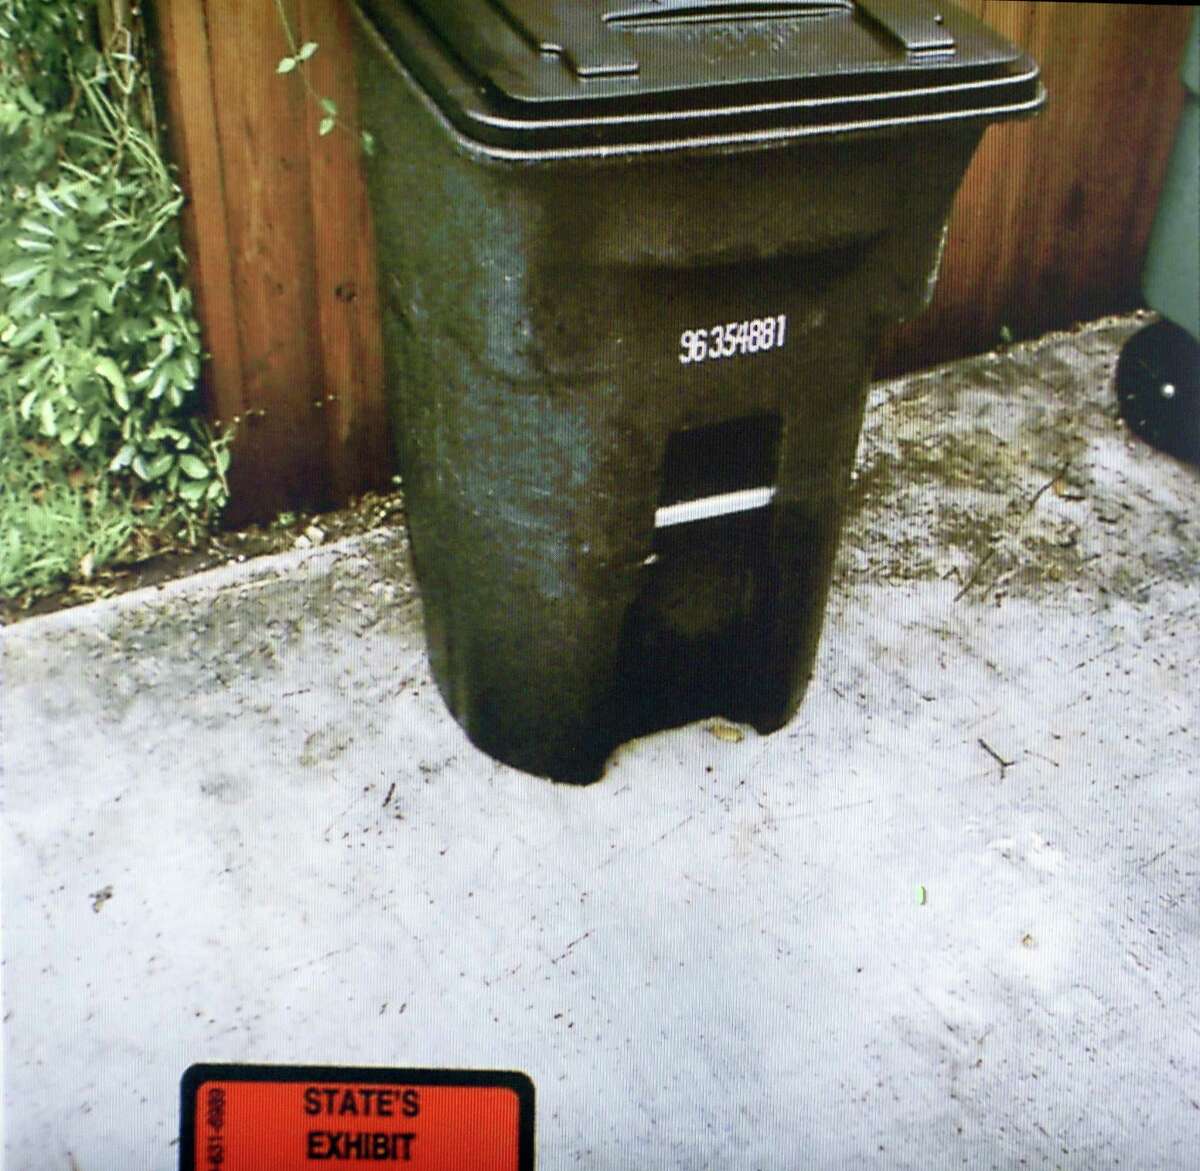 Former San Antonio police officer Emmanuel Galindo's trash can where two hard drives were found is seen in an evidence photo presented in his trial Wednesday, March 1, 2017. Galindo is on trial, with fellow former police officer Alejandro Chapa, for charges of compelling prostitution, official oppression and aggravated sexual assault in 2015. Chapa and Galindo are accused of recruiting and duping women into having sex with them. The photo was taken during a search of Galindo's home after several law enforcement agencies began investigating the alleged crimes.